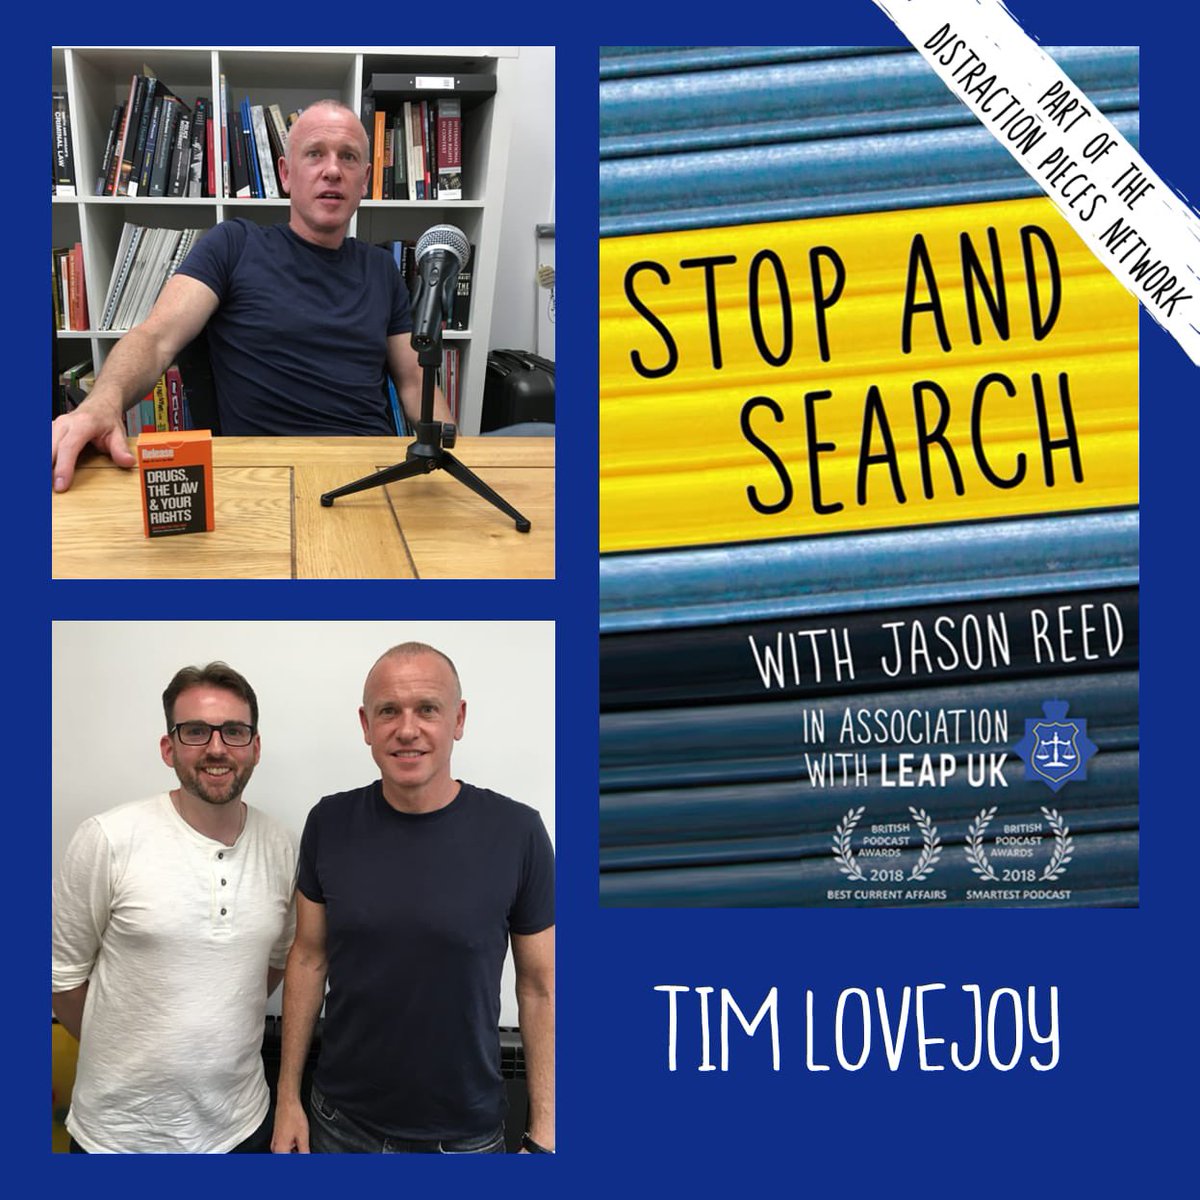 Weekends are the perfect time to catch up on our Stop and Search podcast. Hear our friend @timlovejoy as we discuss drugs, media, mental health and much more. Hear why he is now a big supporter of drug law reform: PodFollow pod.fo/e/15cb90